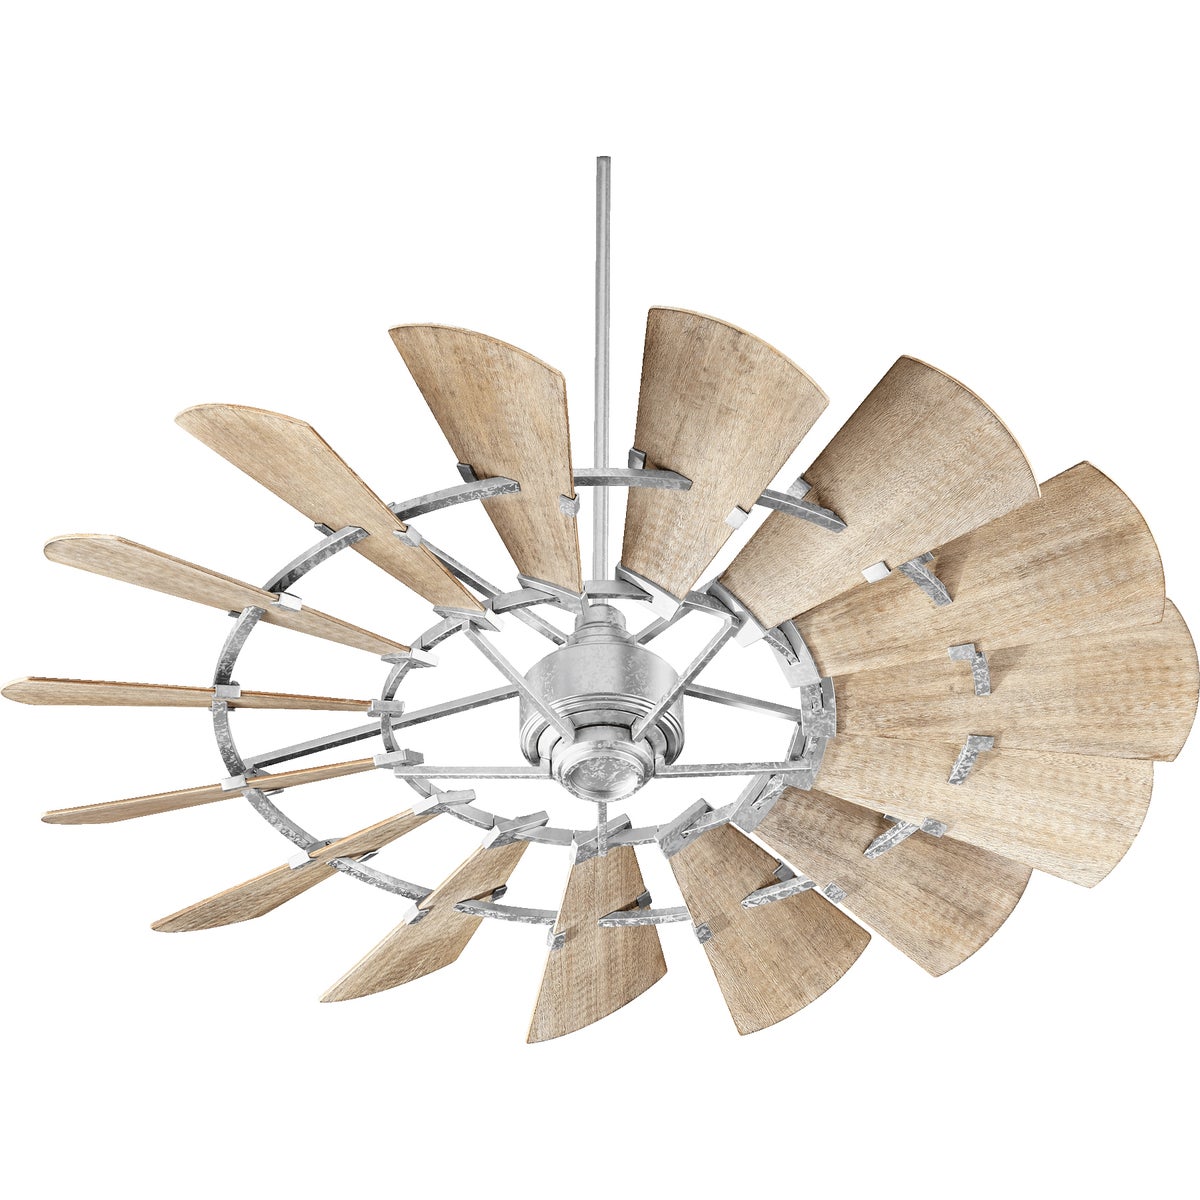 Windmill Ceiling Fan with 15 weathered oak wooden blades, rustic design. UL Listed, Dry Location. Dimensions: 16.5&quot;H x 60&quot;W. Limited Lifetime Warranty.